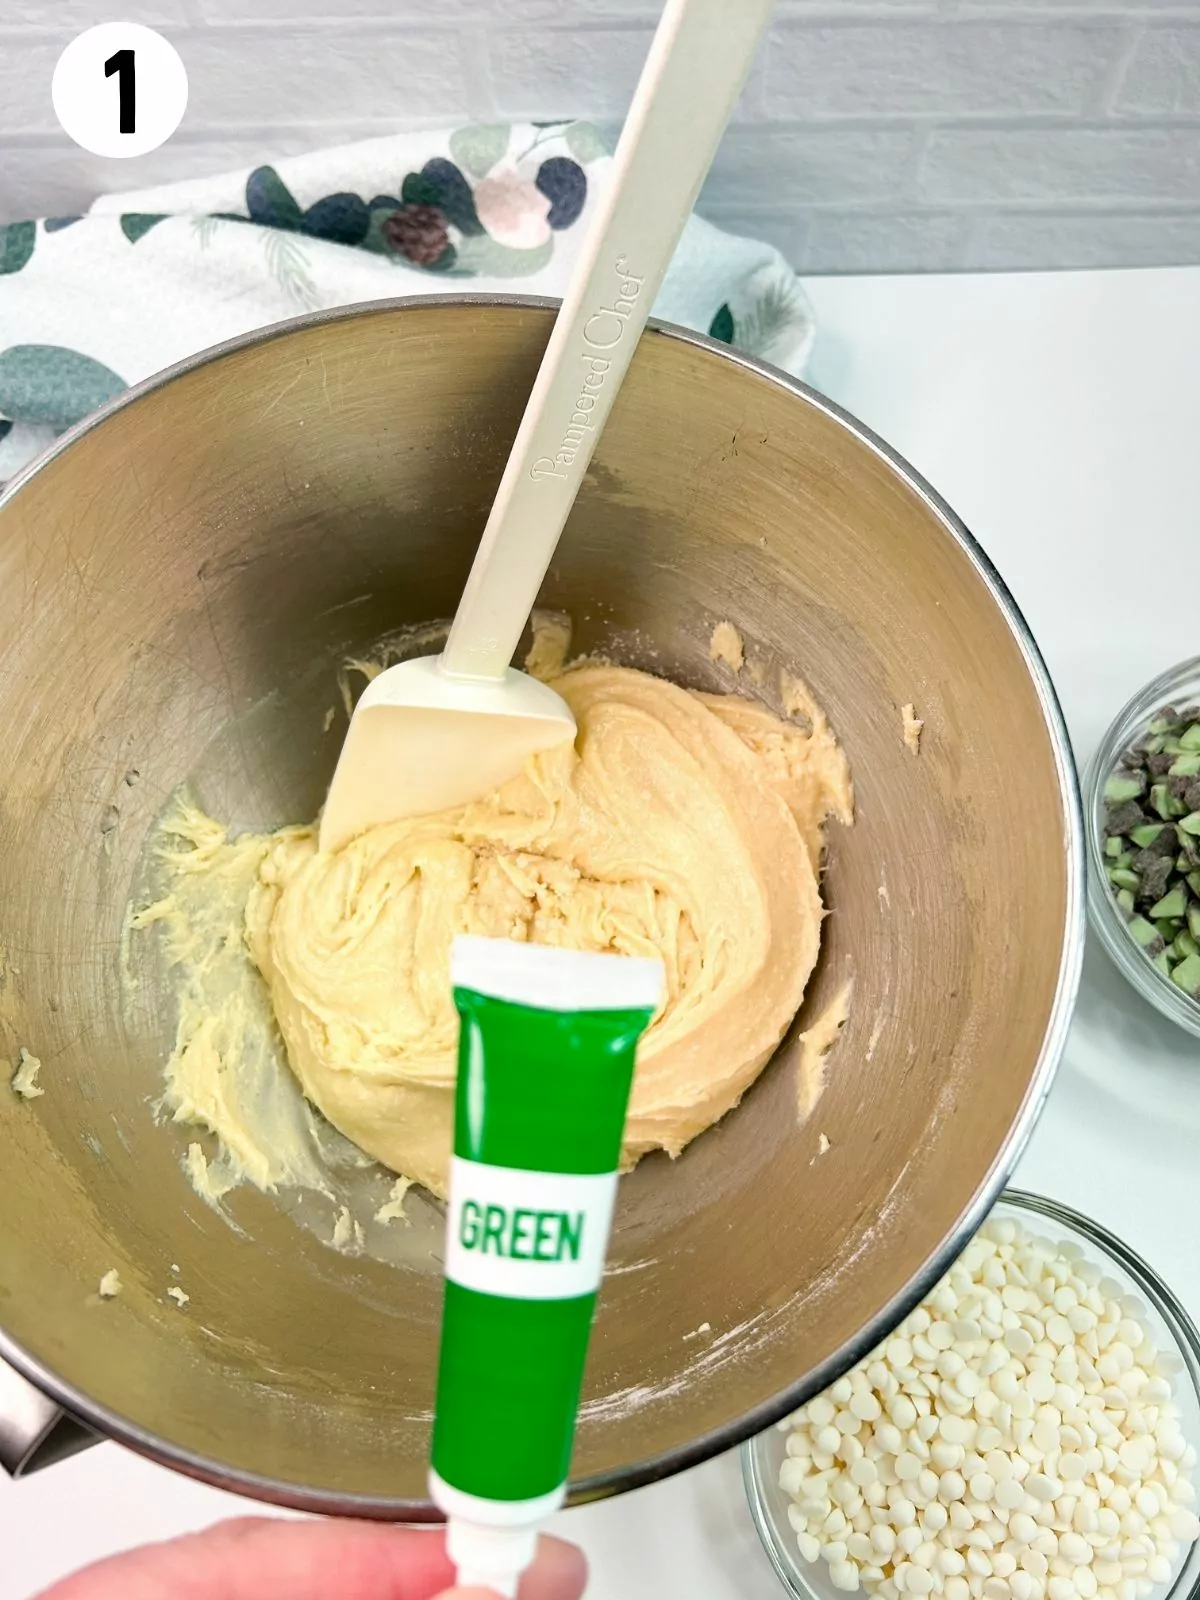 Add green food coloring to cake mix batter.